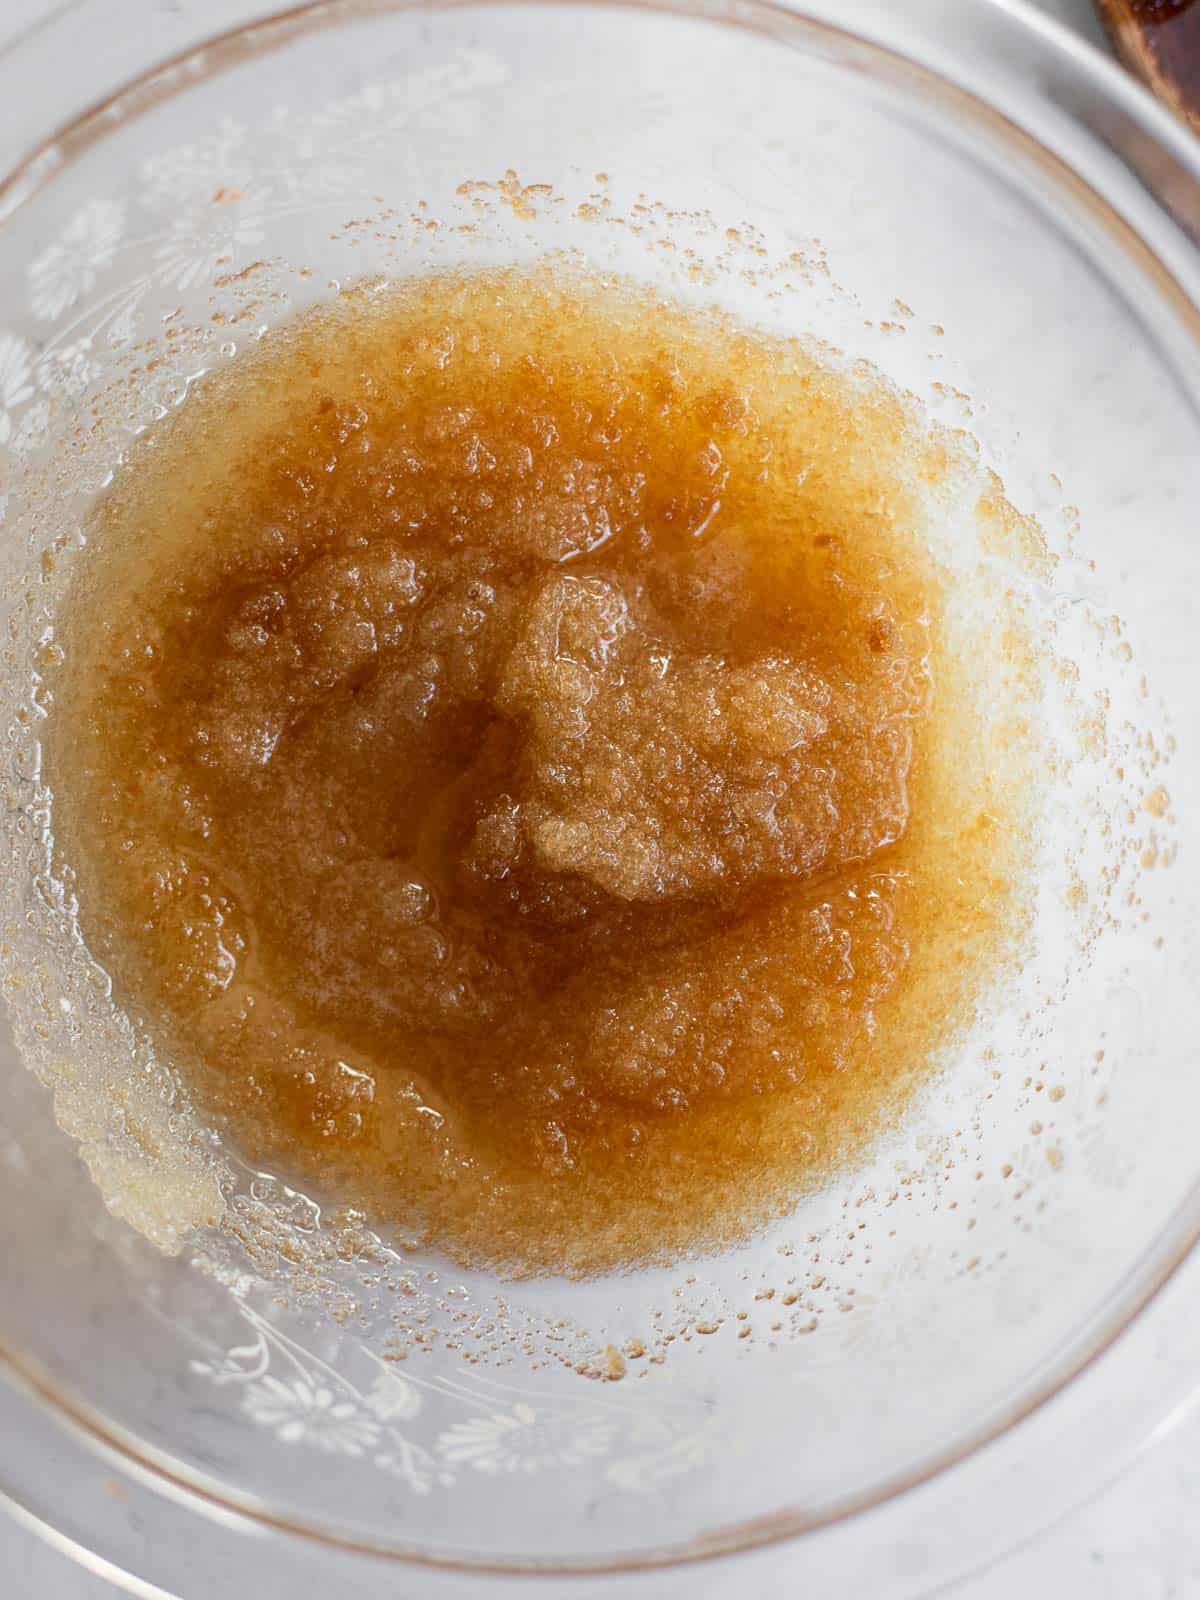 oil and sugar mixed together in a glass bowl.